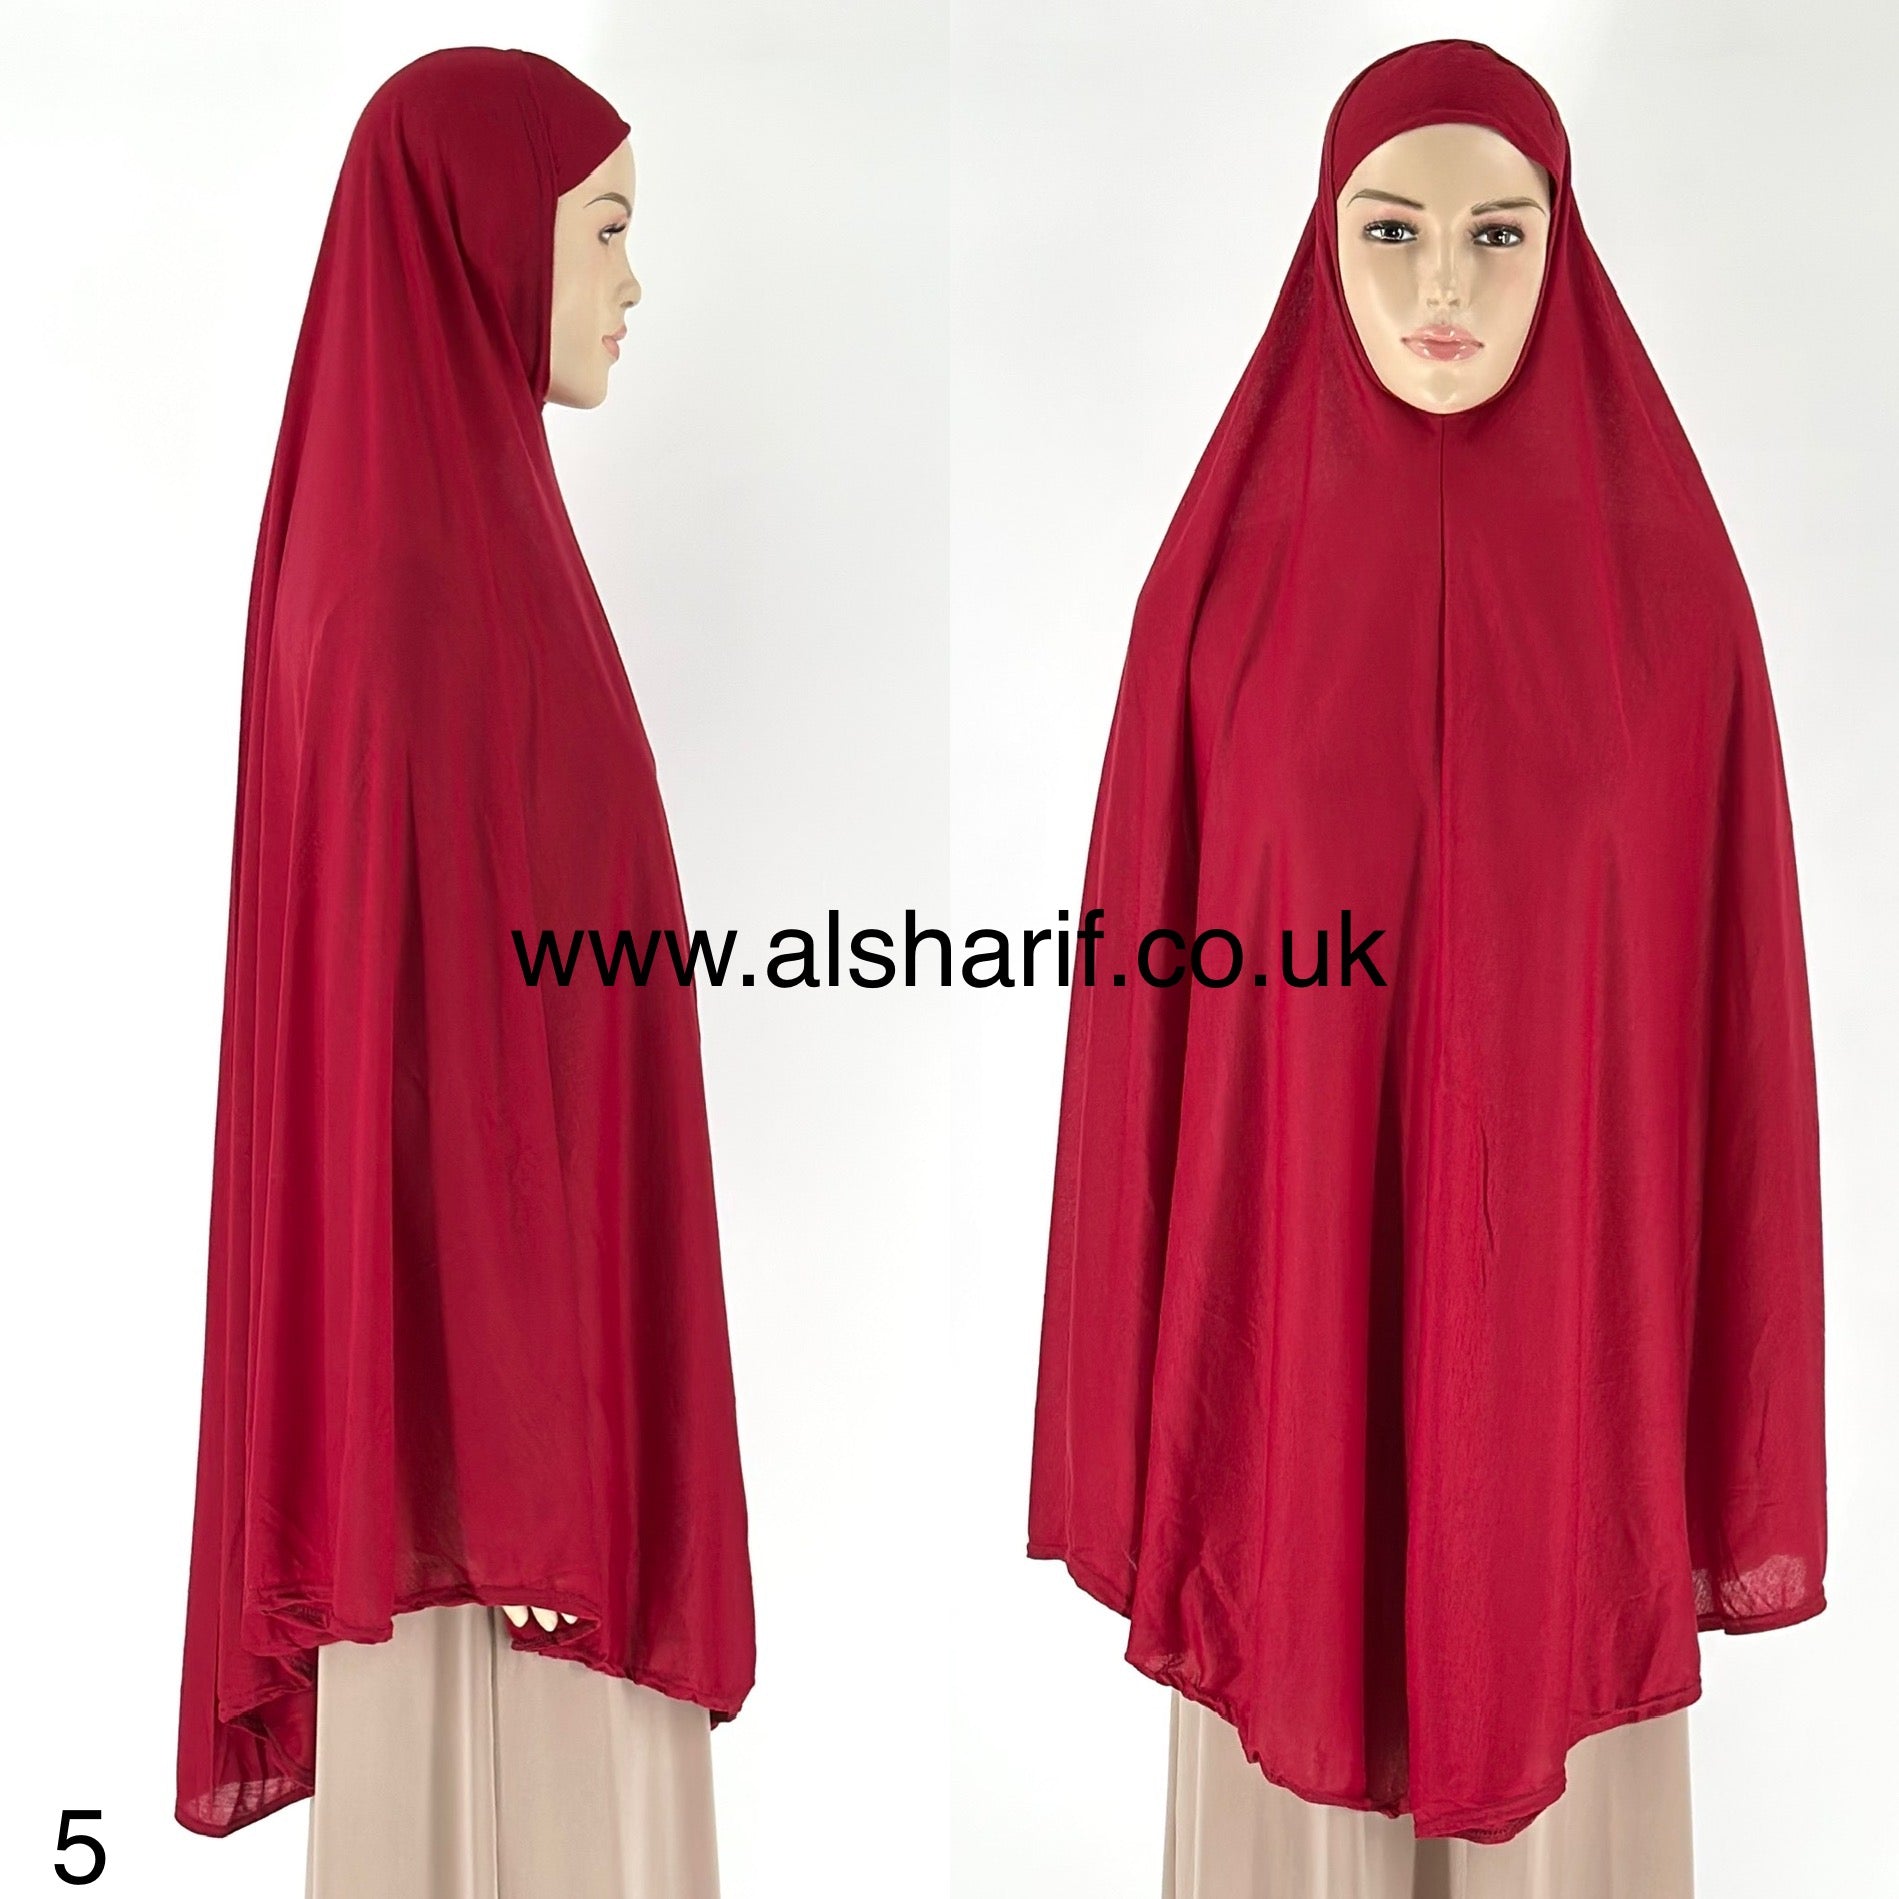 Extra Long Cotton Polyester Mix Khimar One Piece Slip-on Hijab -5 (Red)